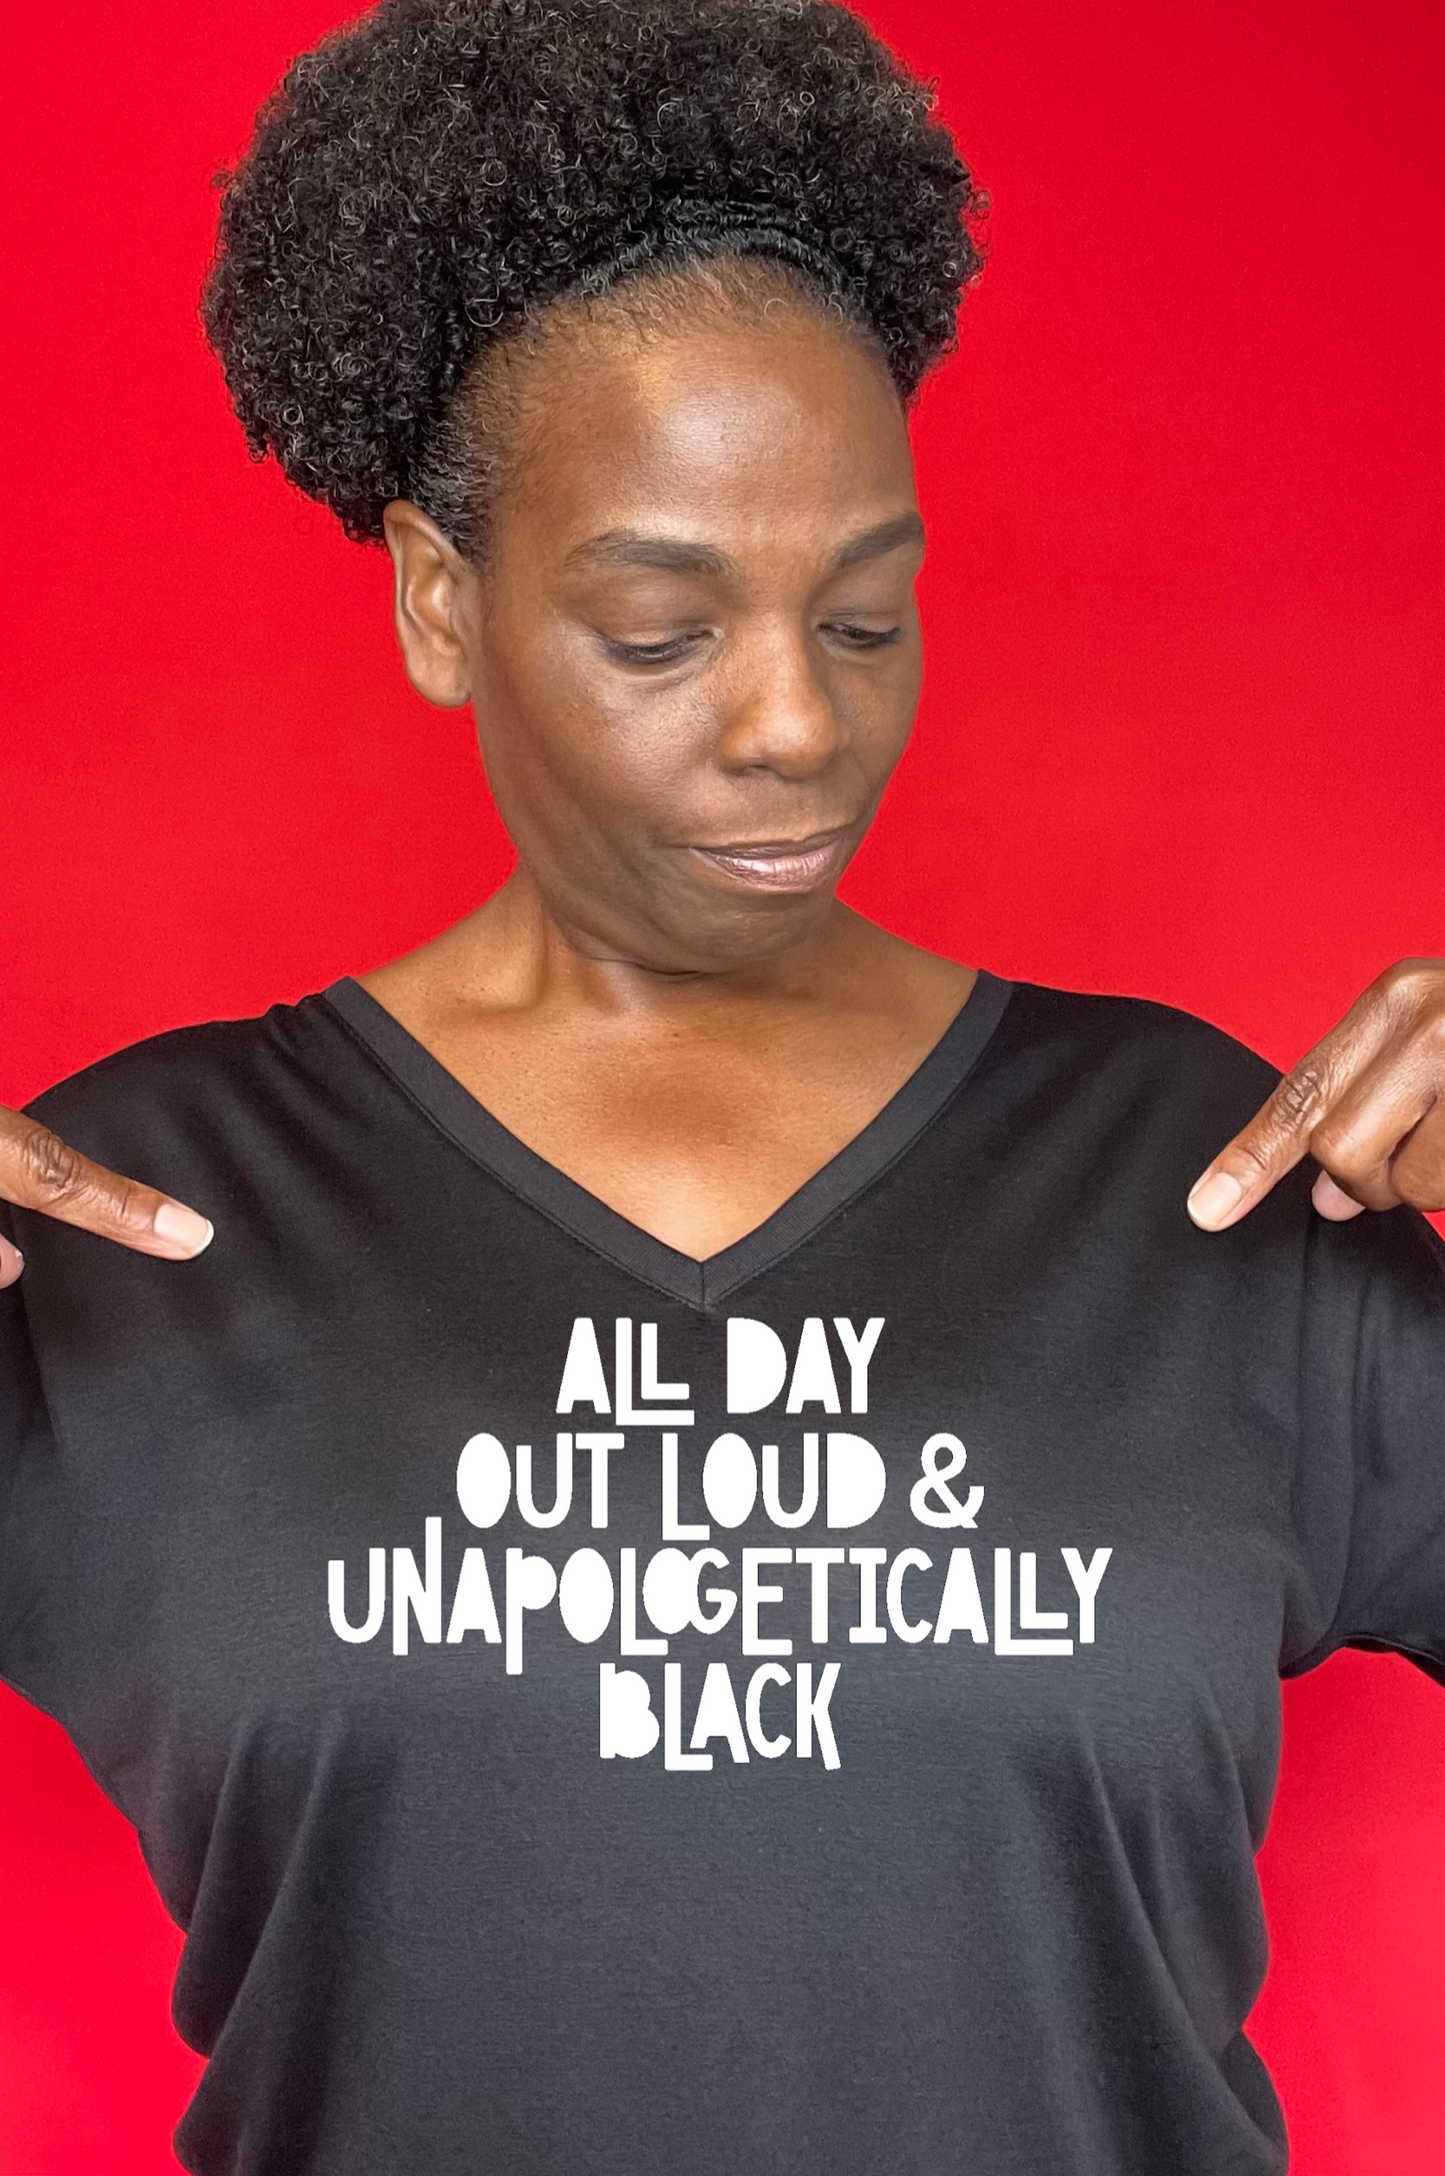 All Day Out Loud & Unapologetically Black T-shirt